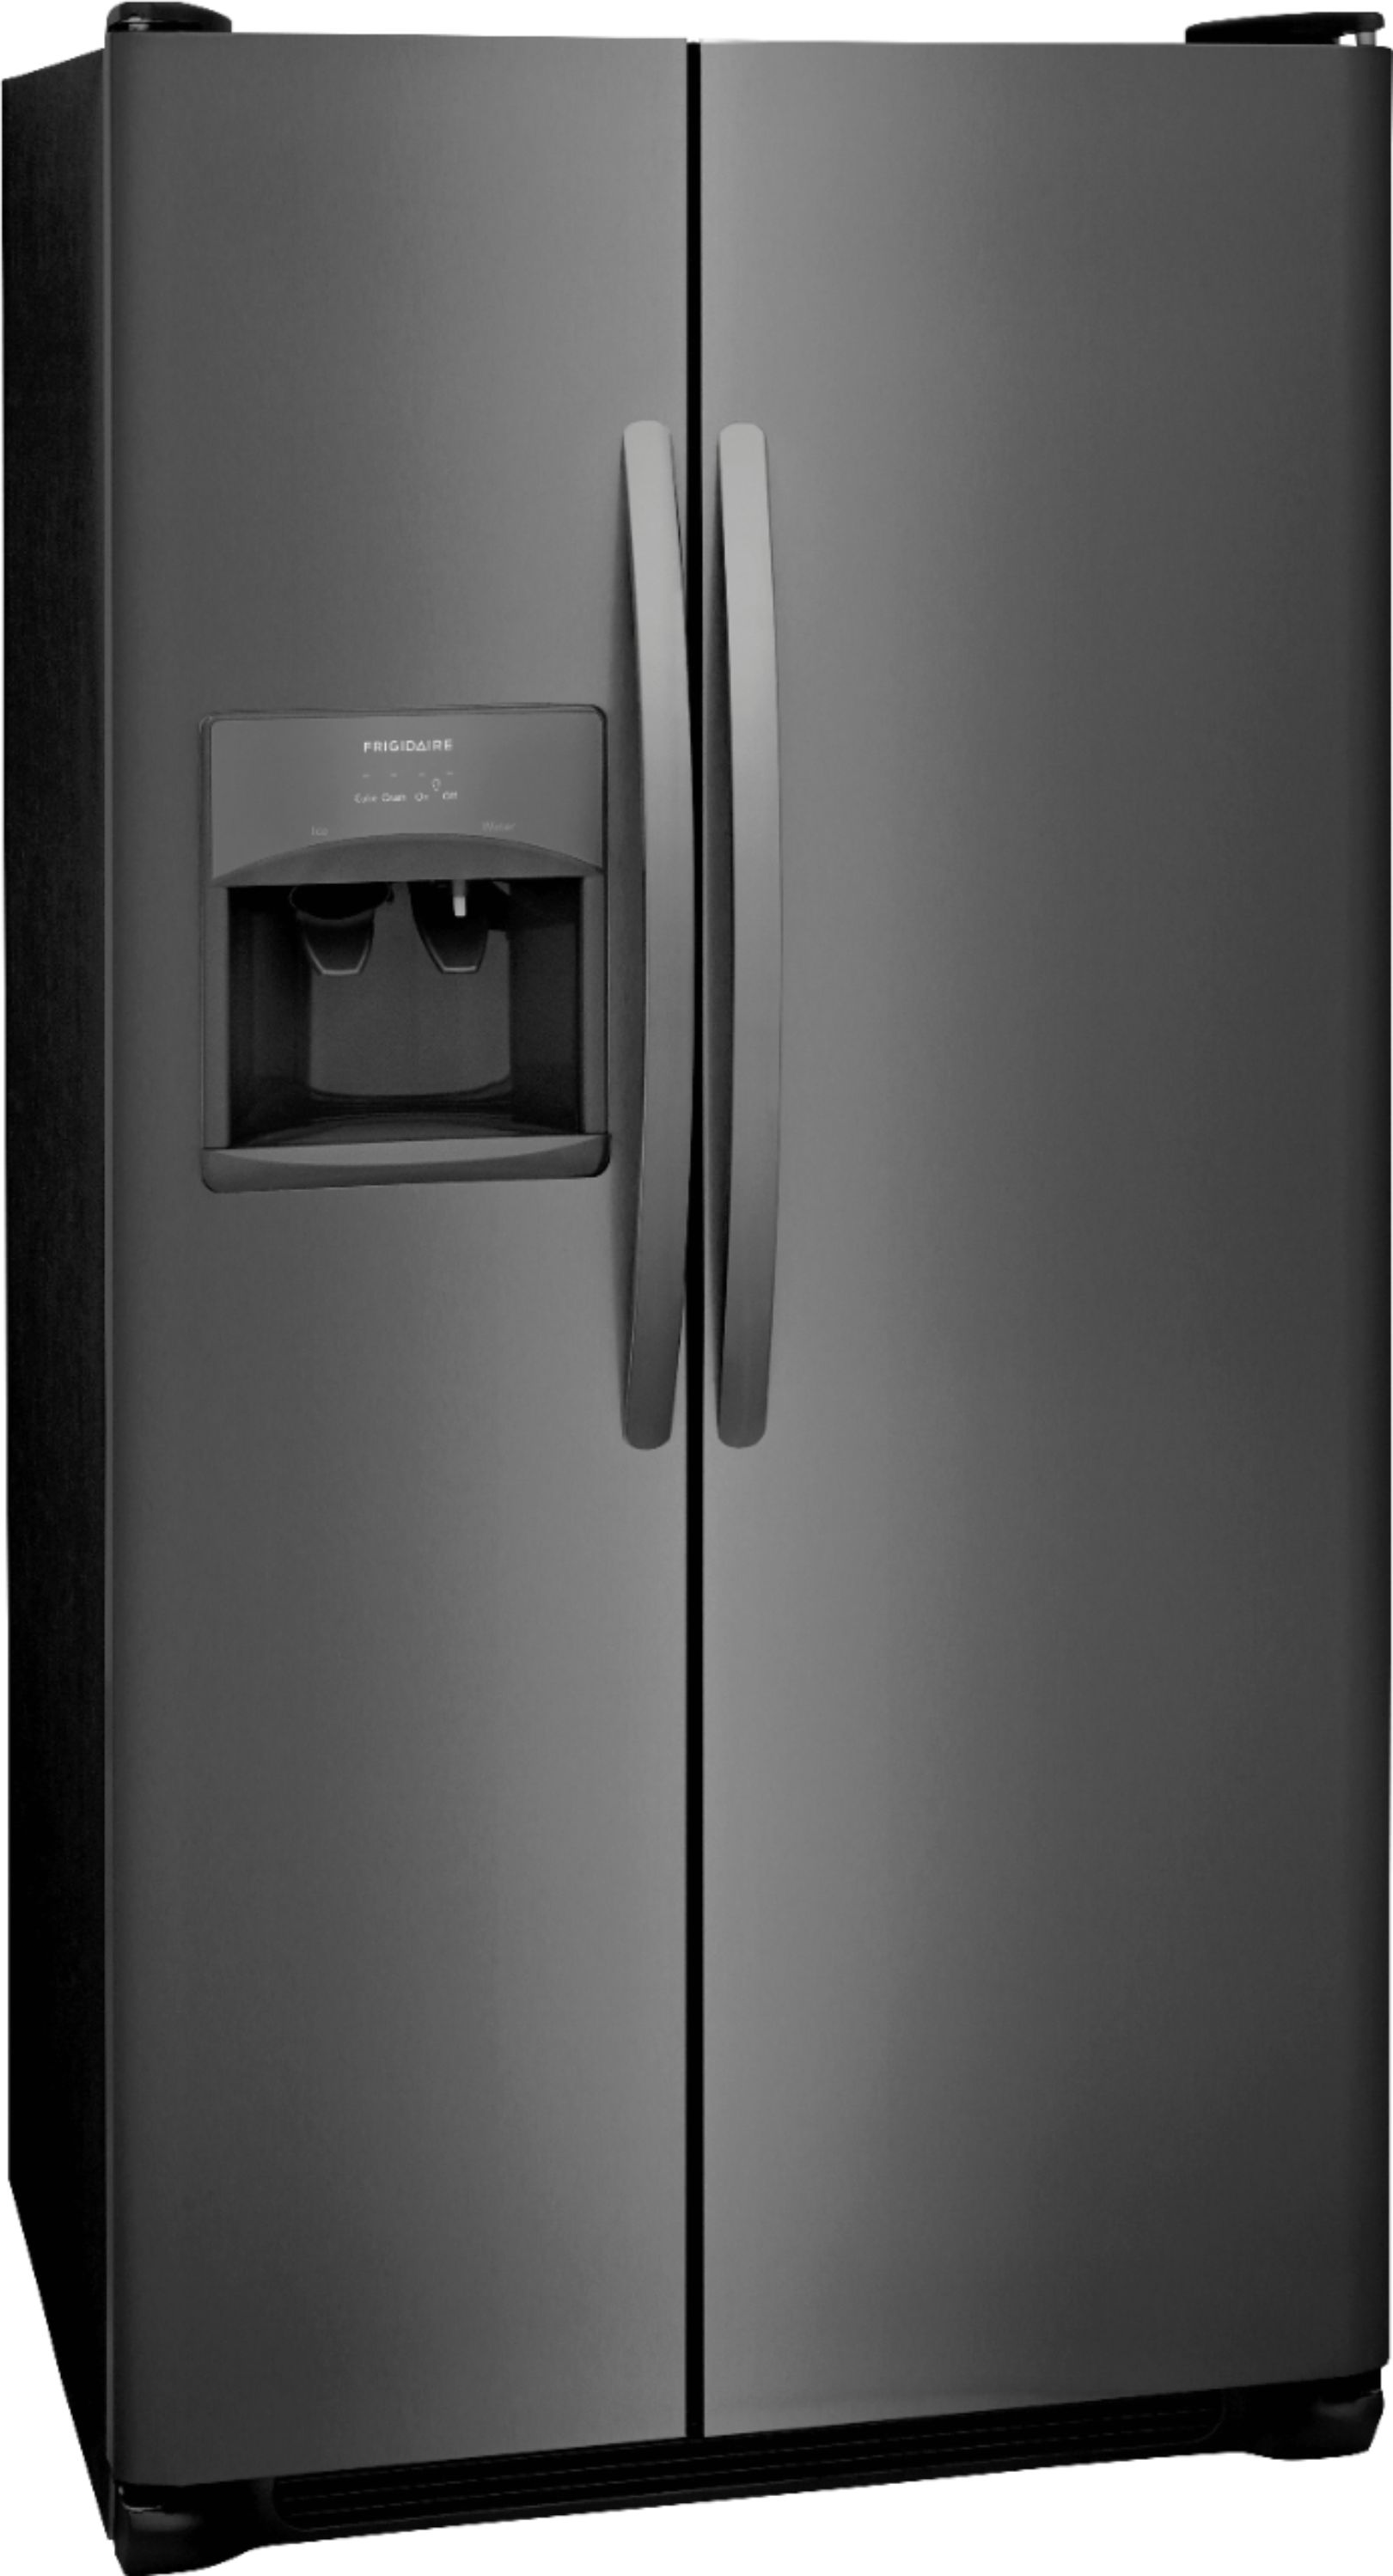 Angle View: Frigidaire - 22 Cu. Ft. Refrigerator - Black stainless steel